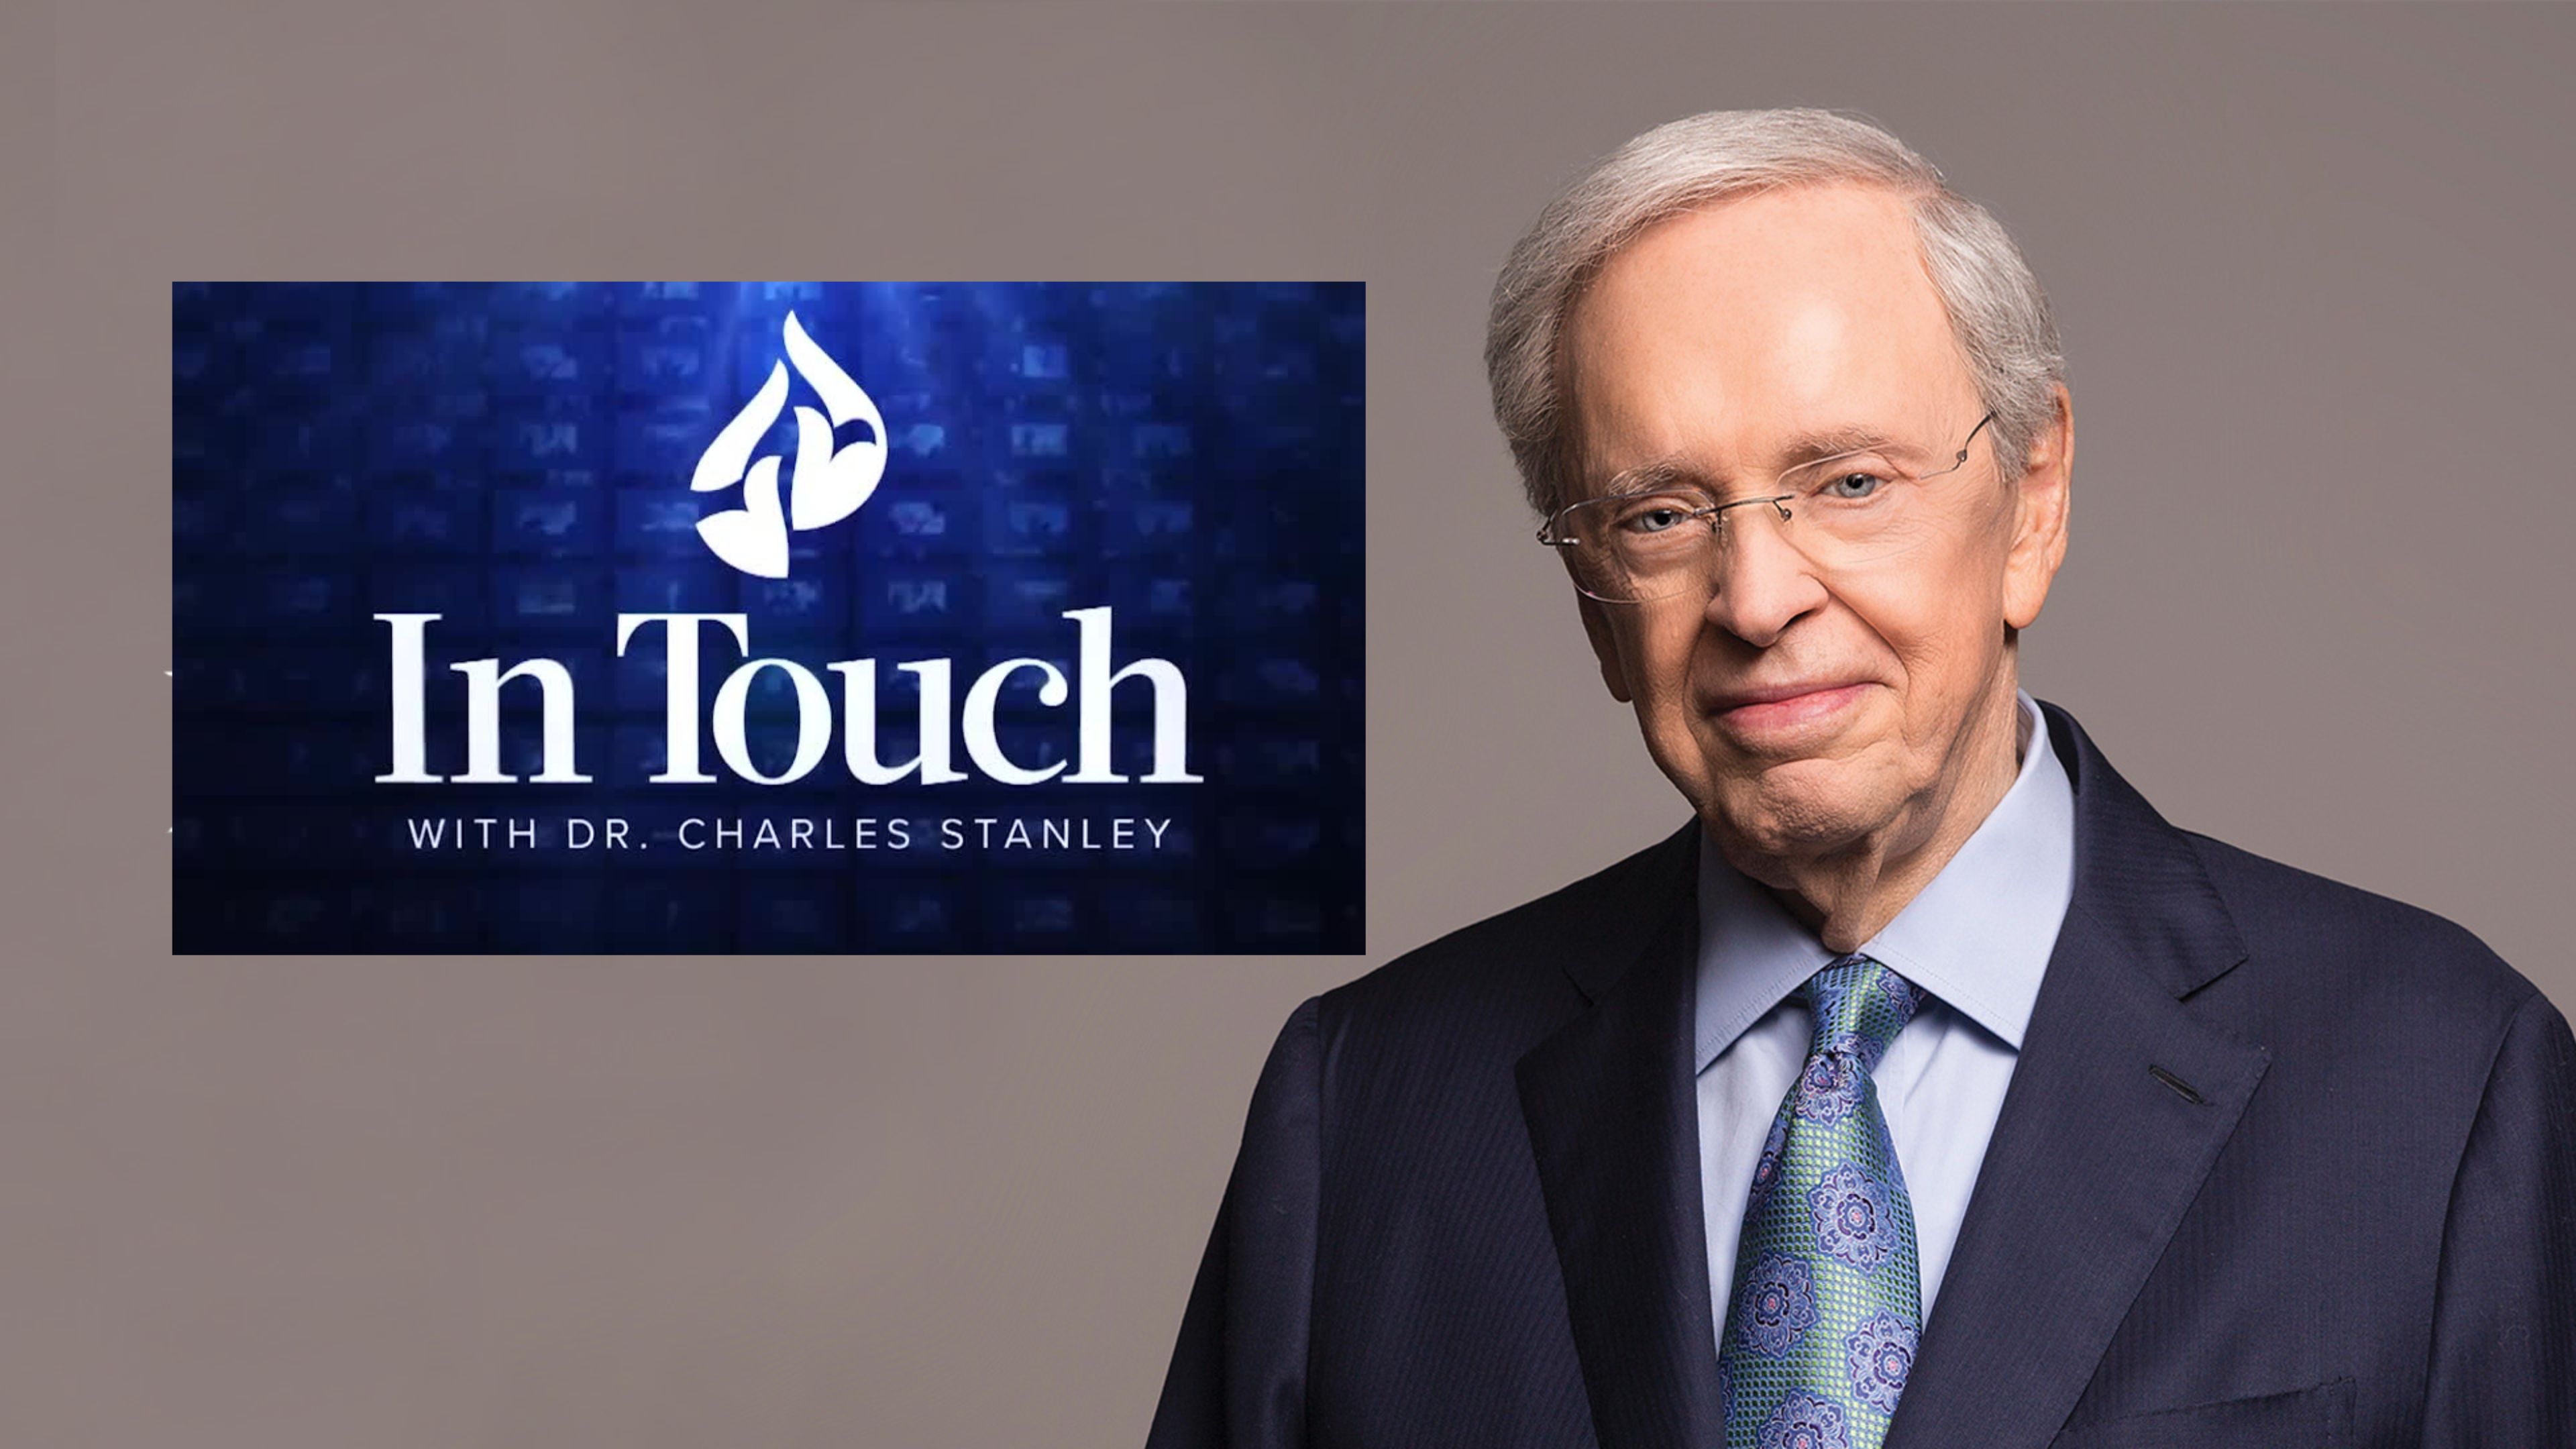 in touch with dr. charles stanley season 1 episode 15